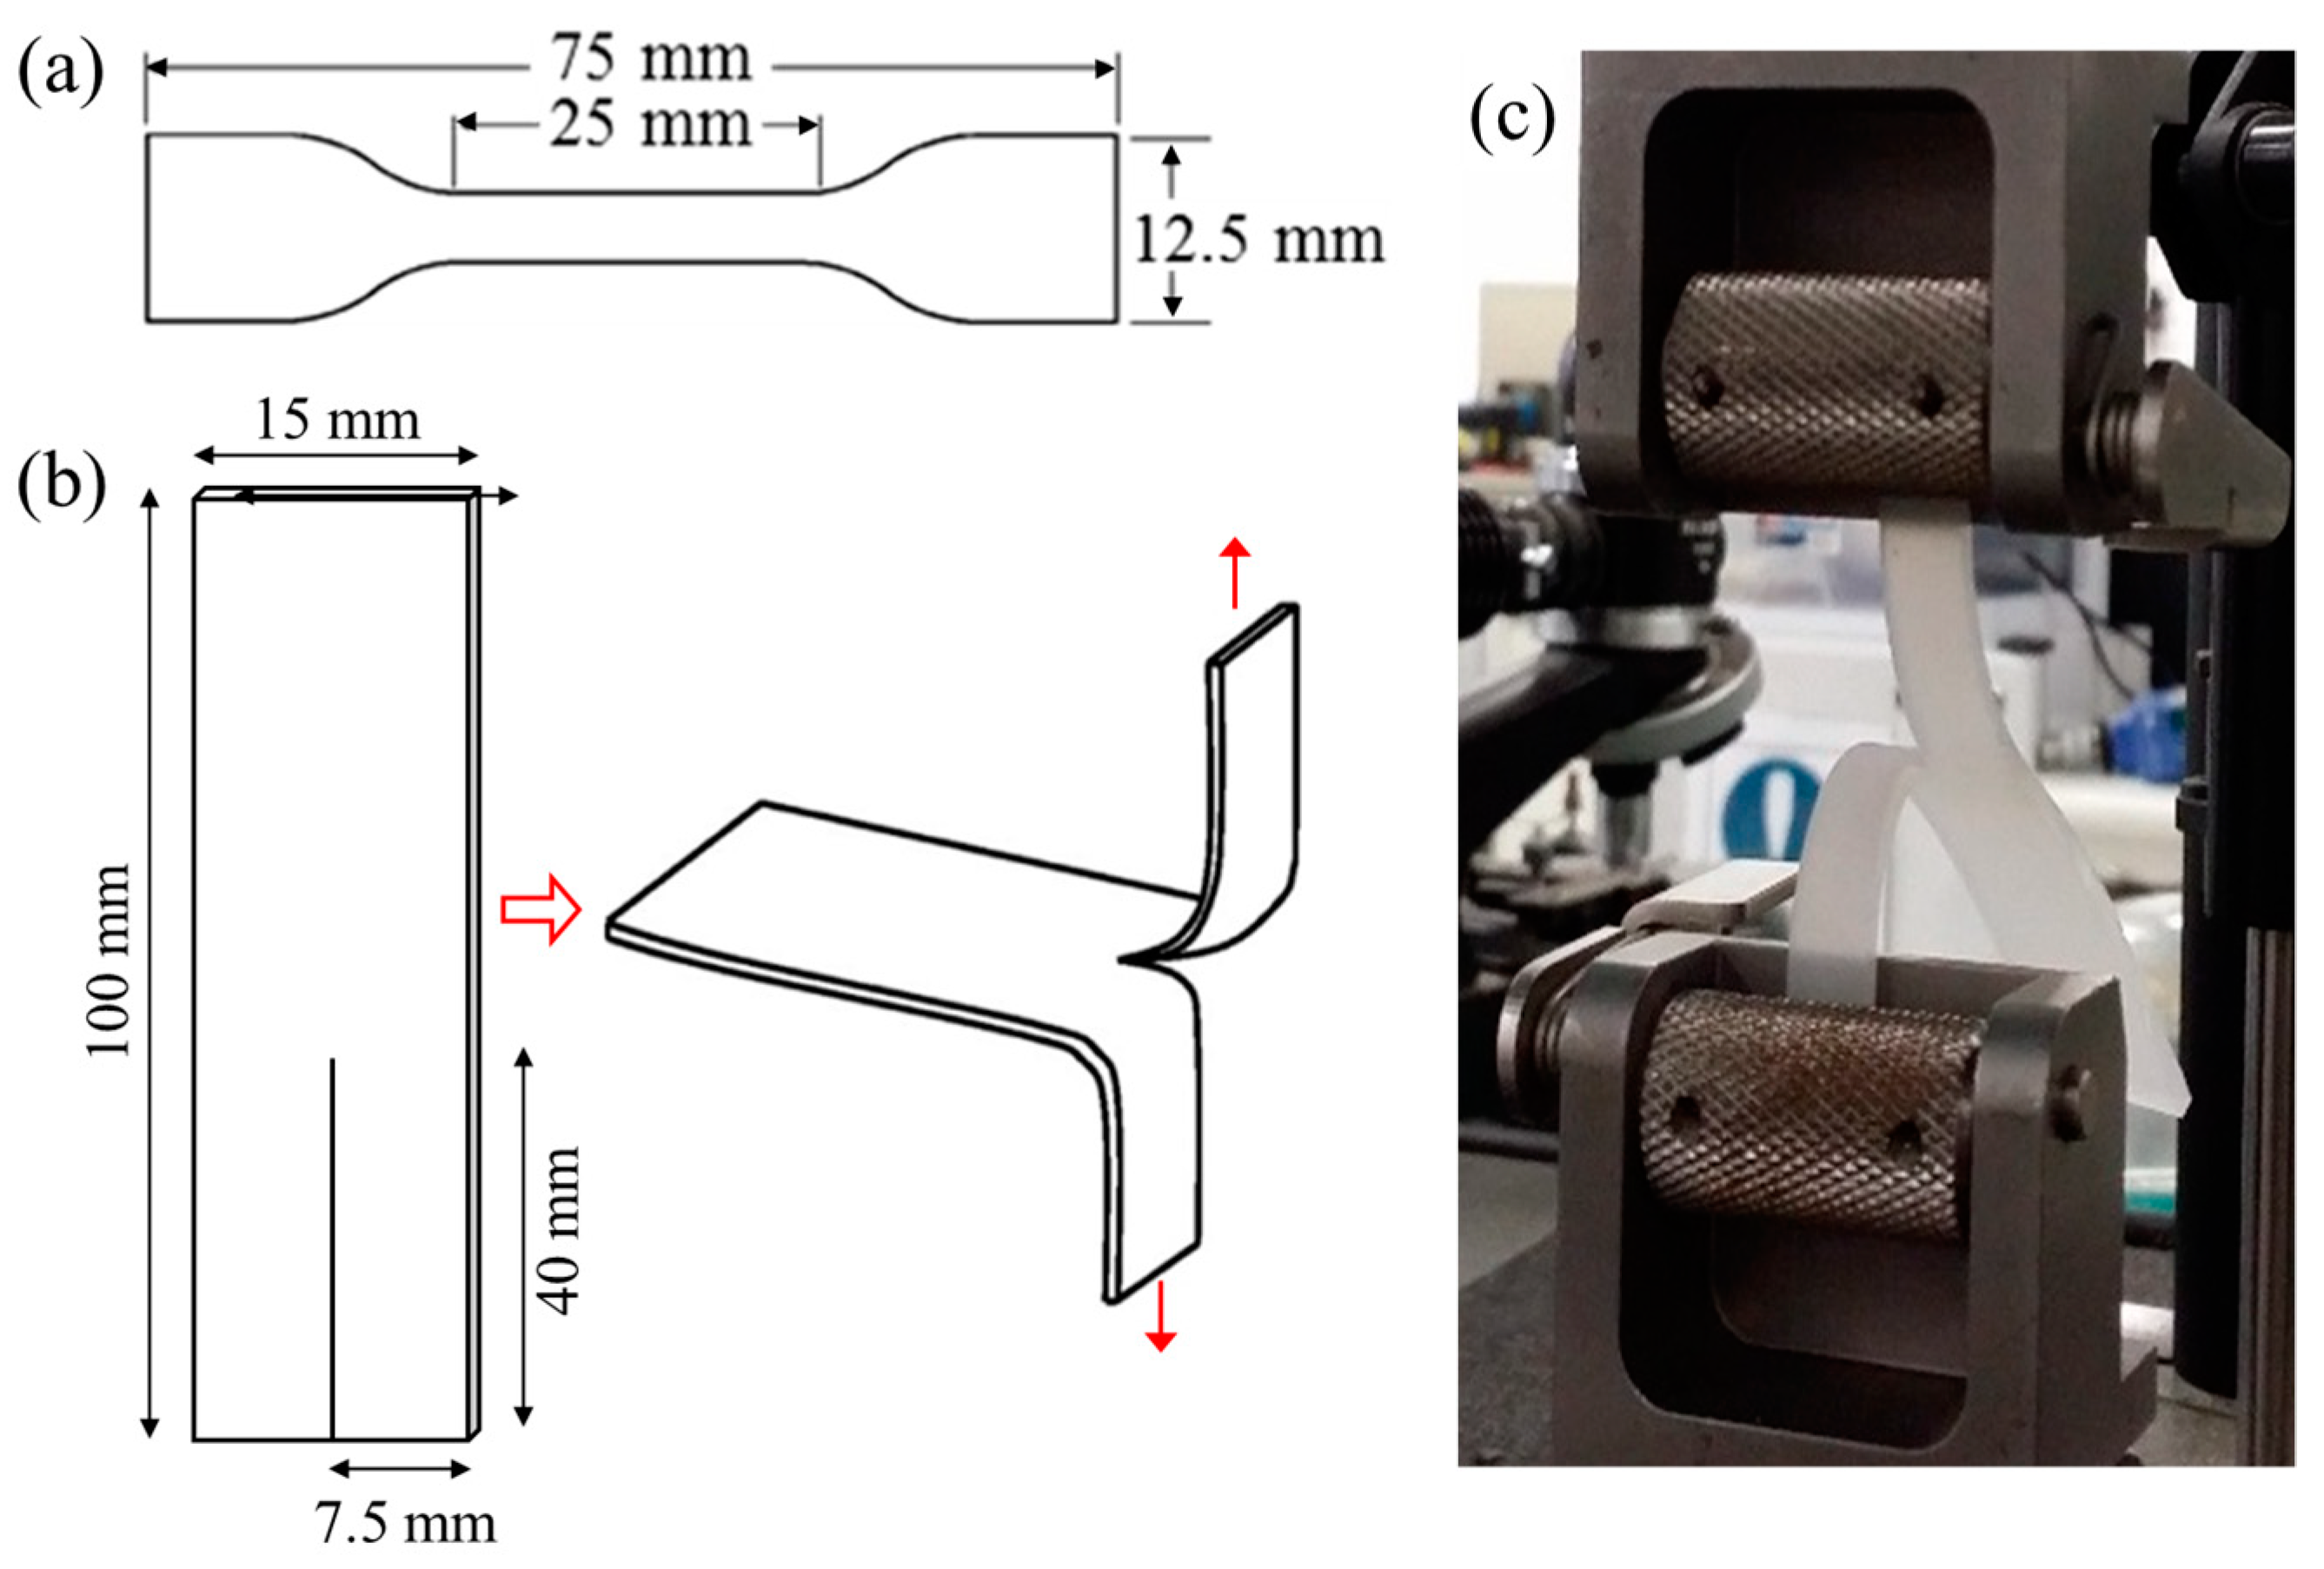 Trouser tear testing of thin anisotropic polymer films and laminates   SpringerLink